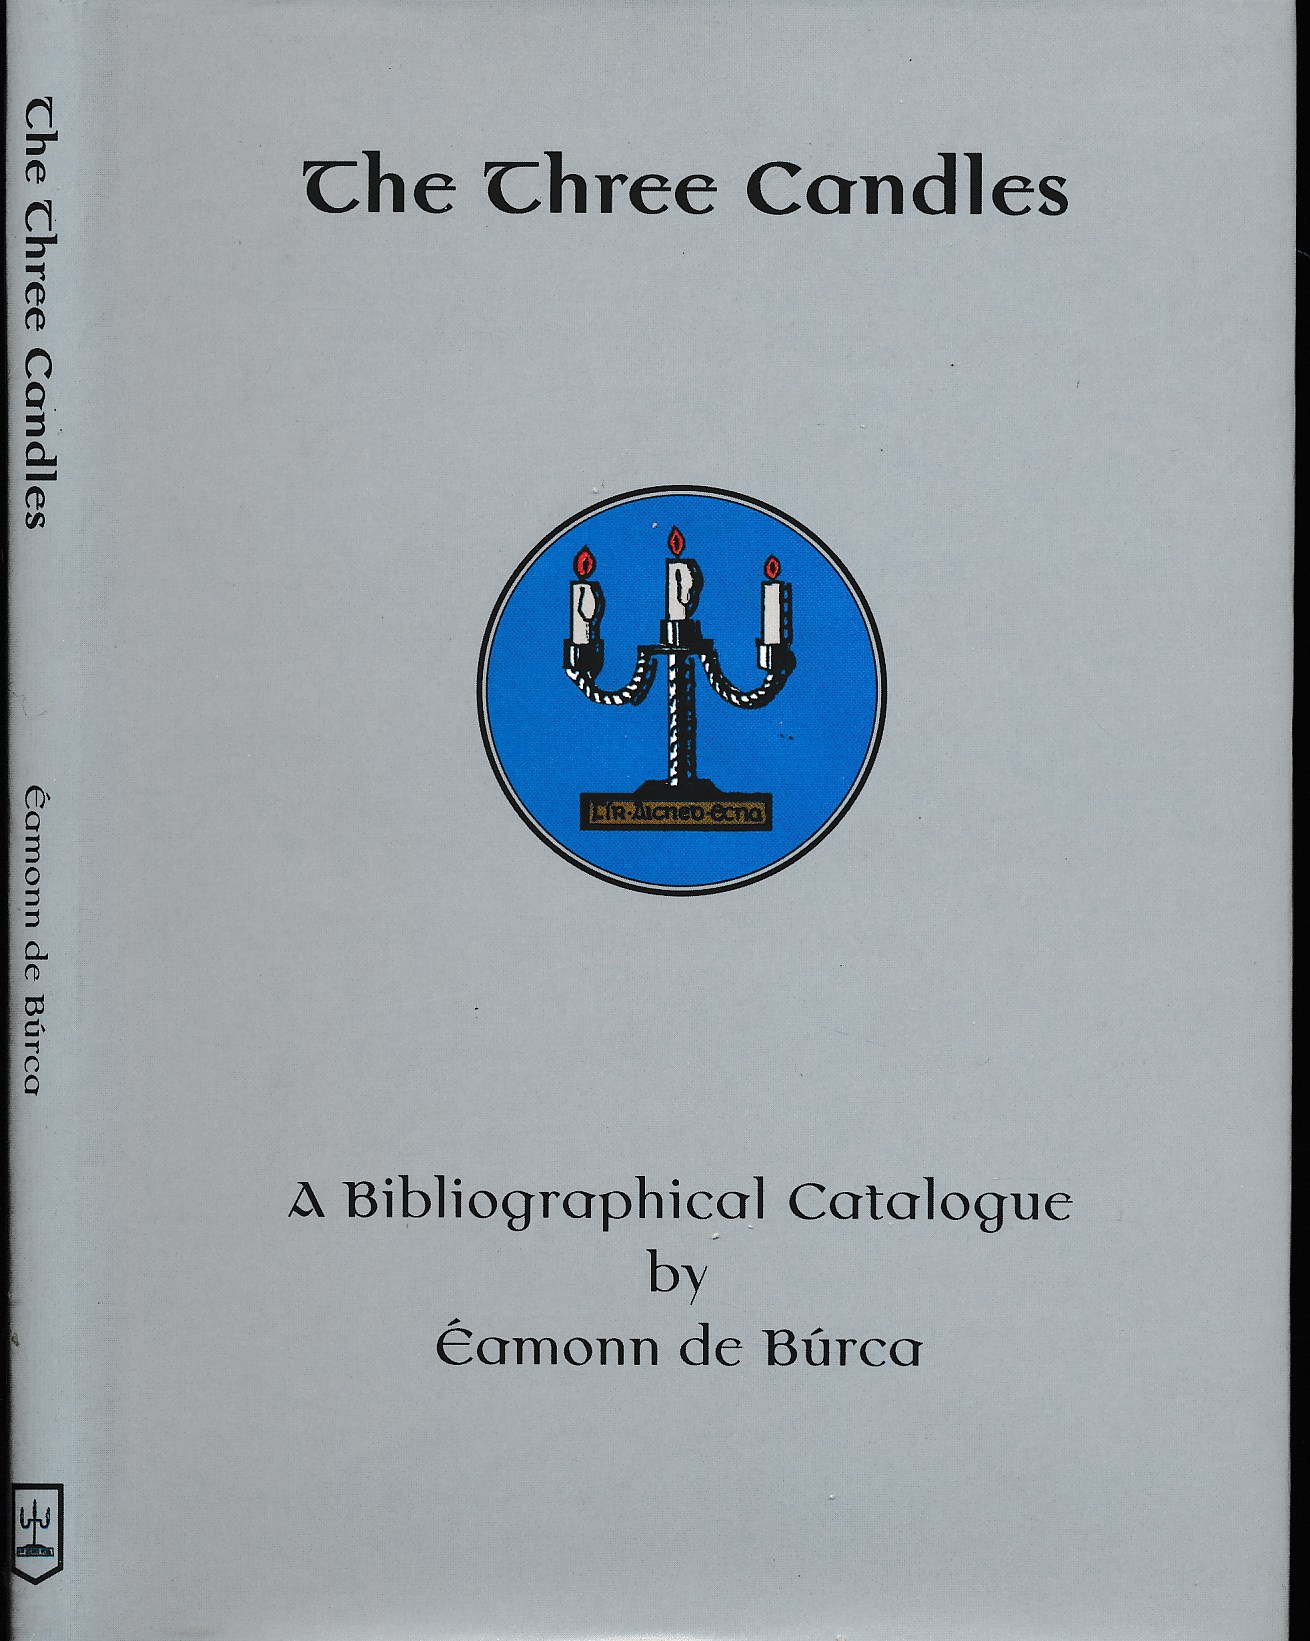 The Three Candles Collection. A Bibliographical Catalogue. Signed copy.